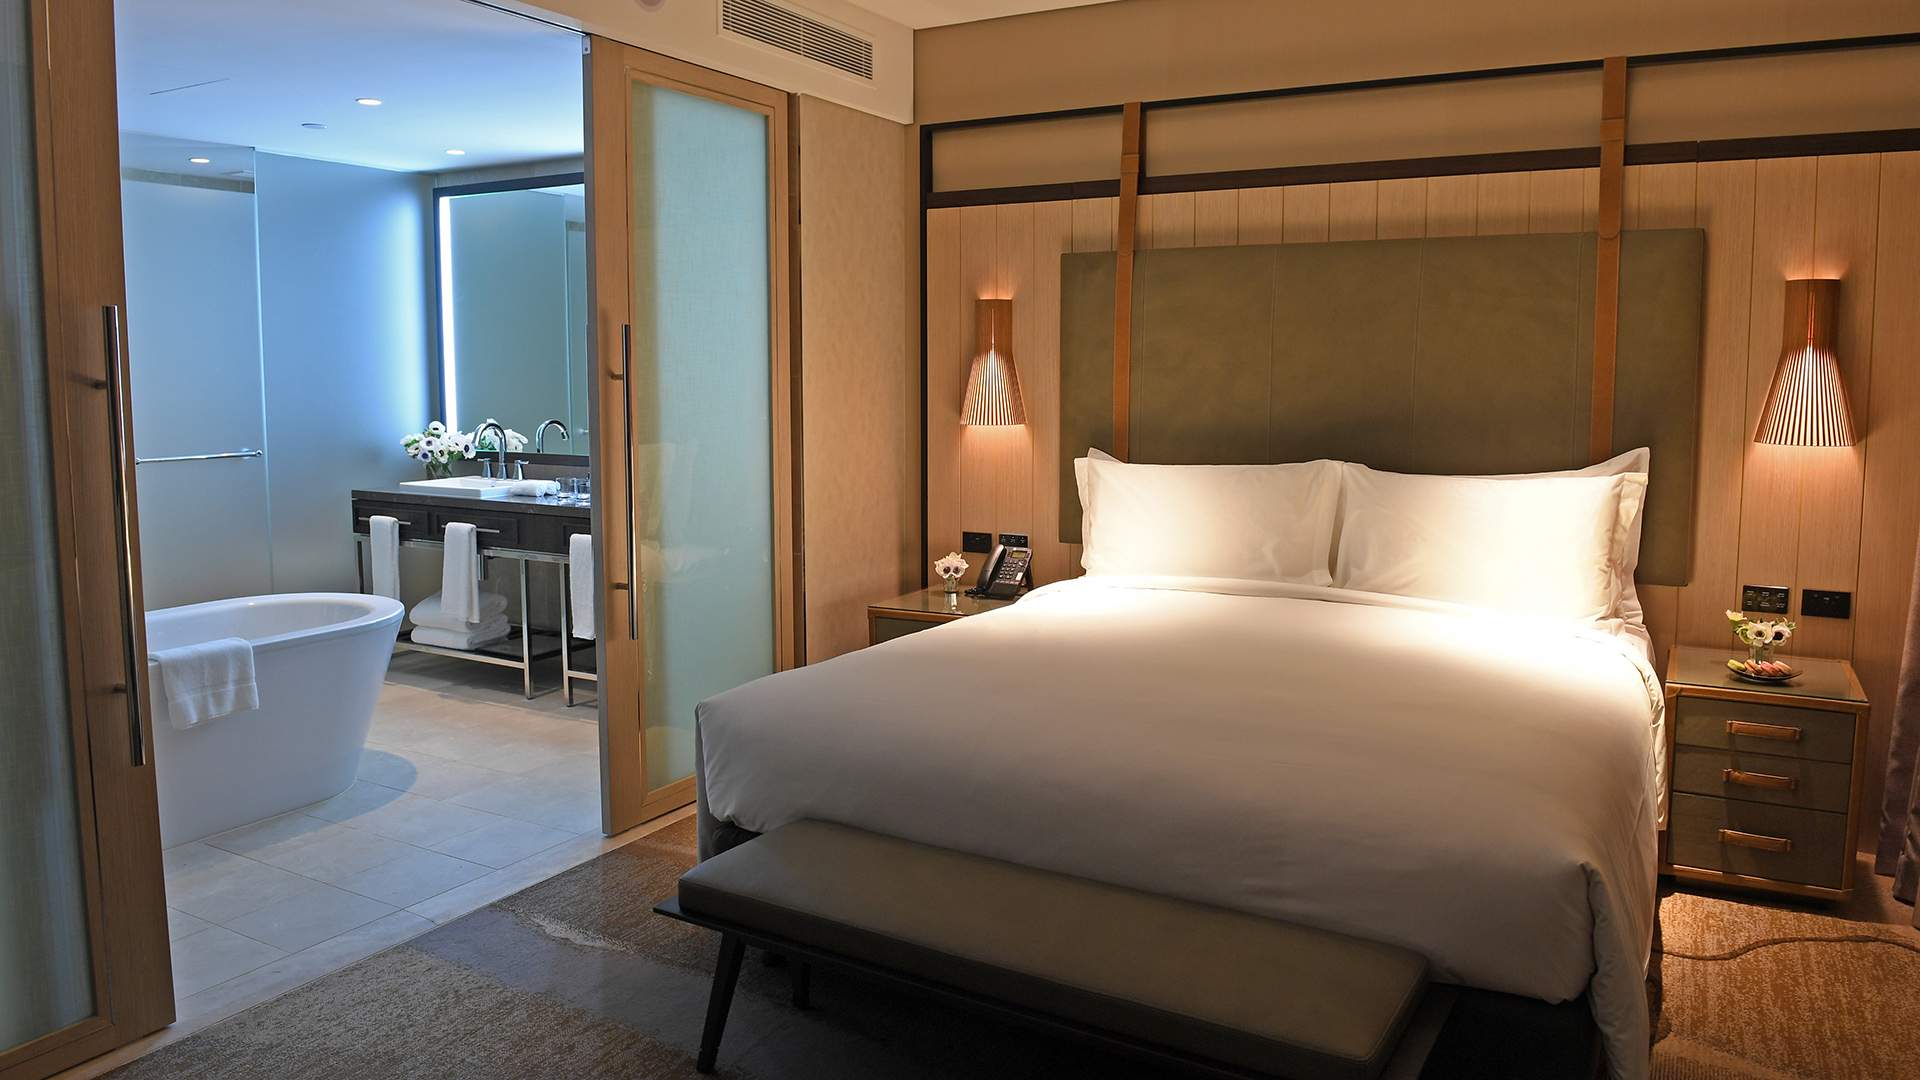 A Massive New Luxury Hotel Has Opened in Darling Harbour